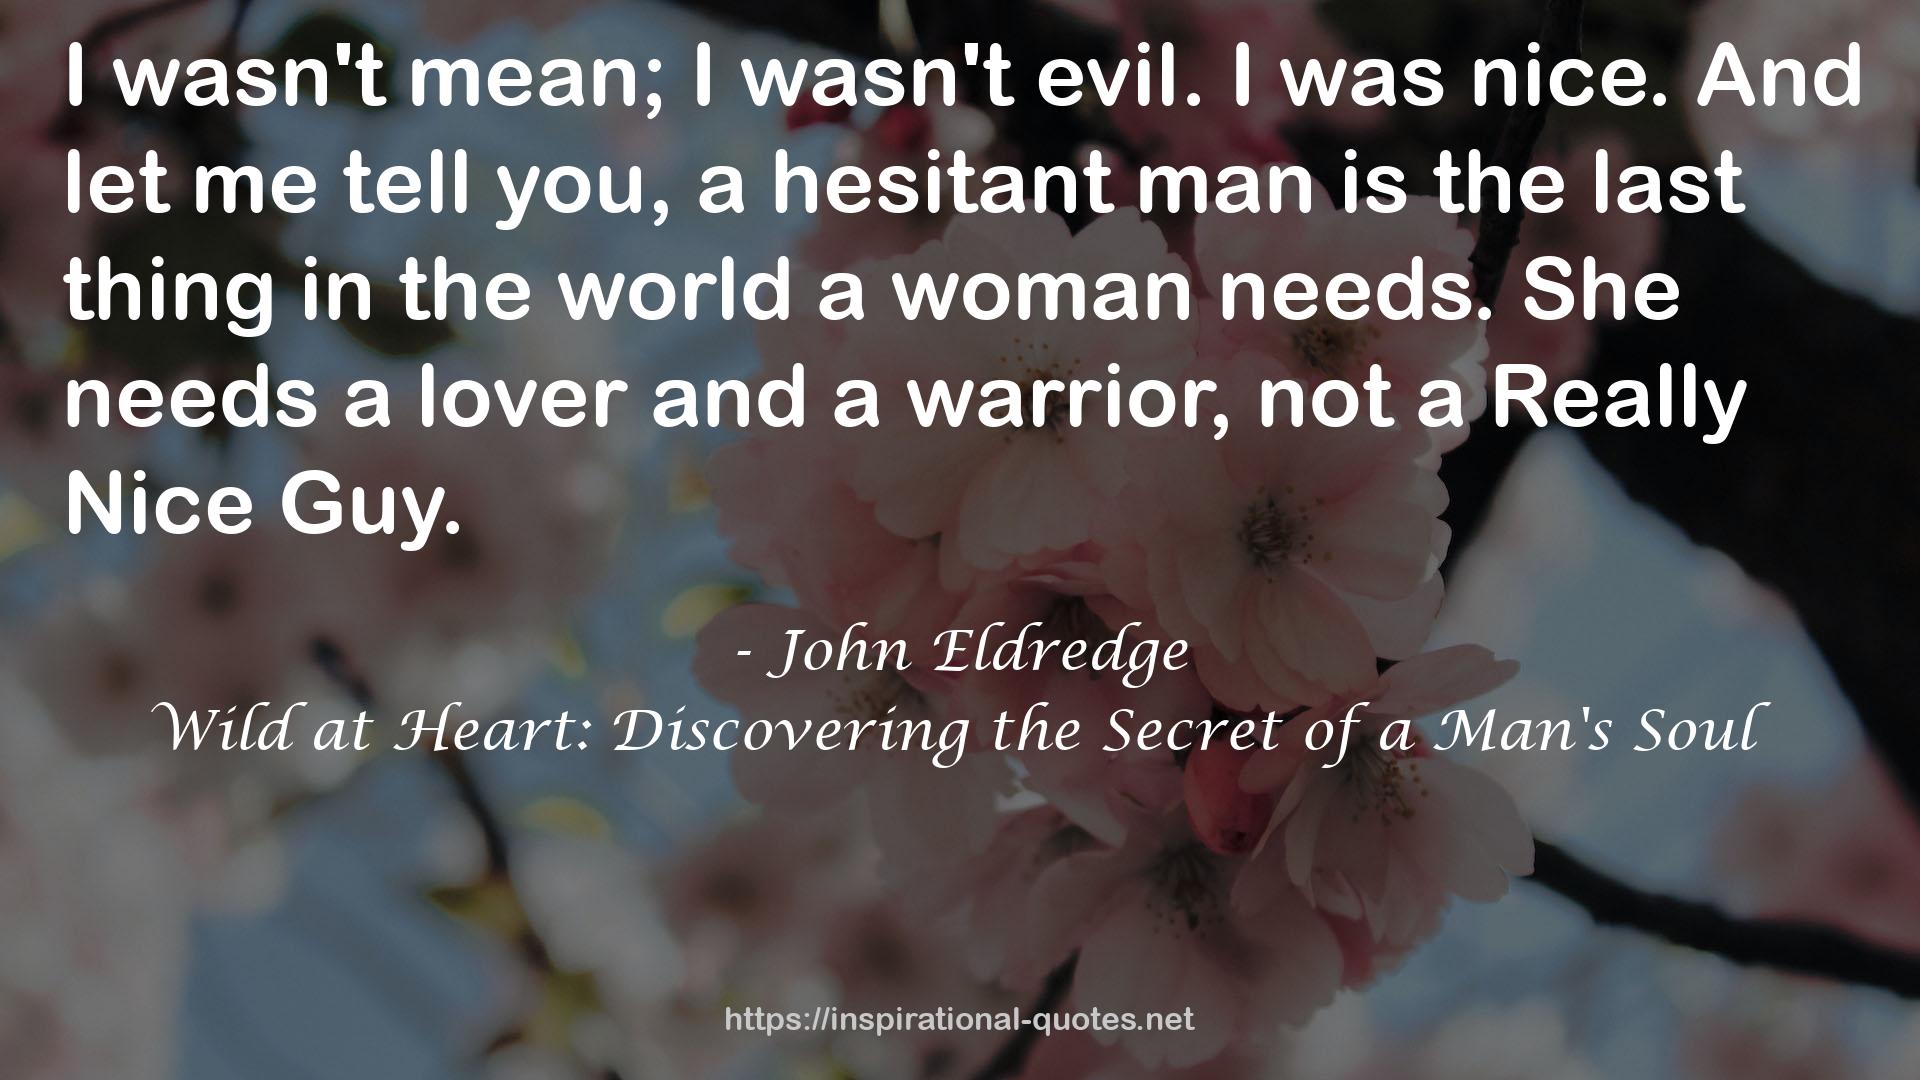 Wild at Heart: Discovering the Secret of a Man's Soul QUOTES